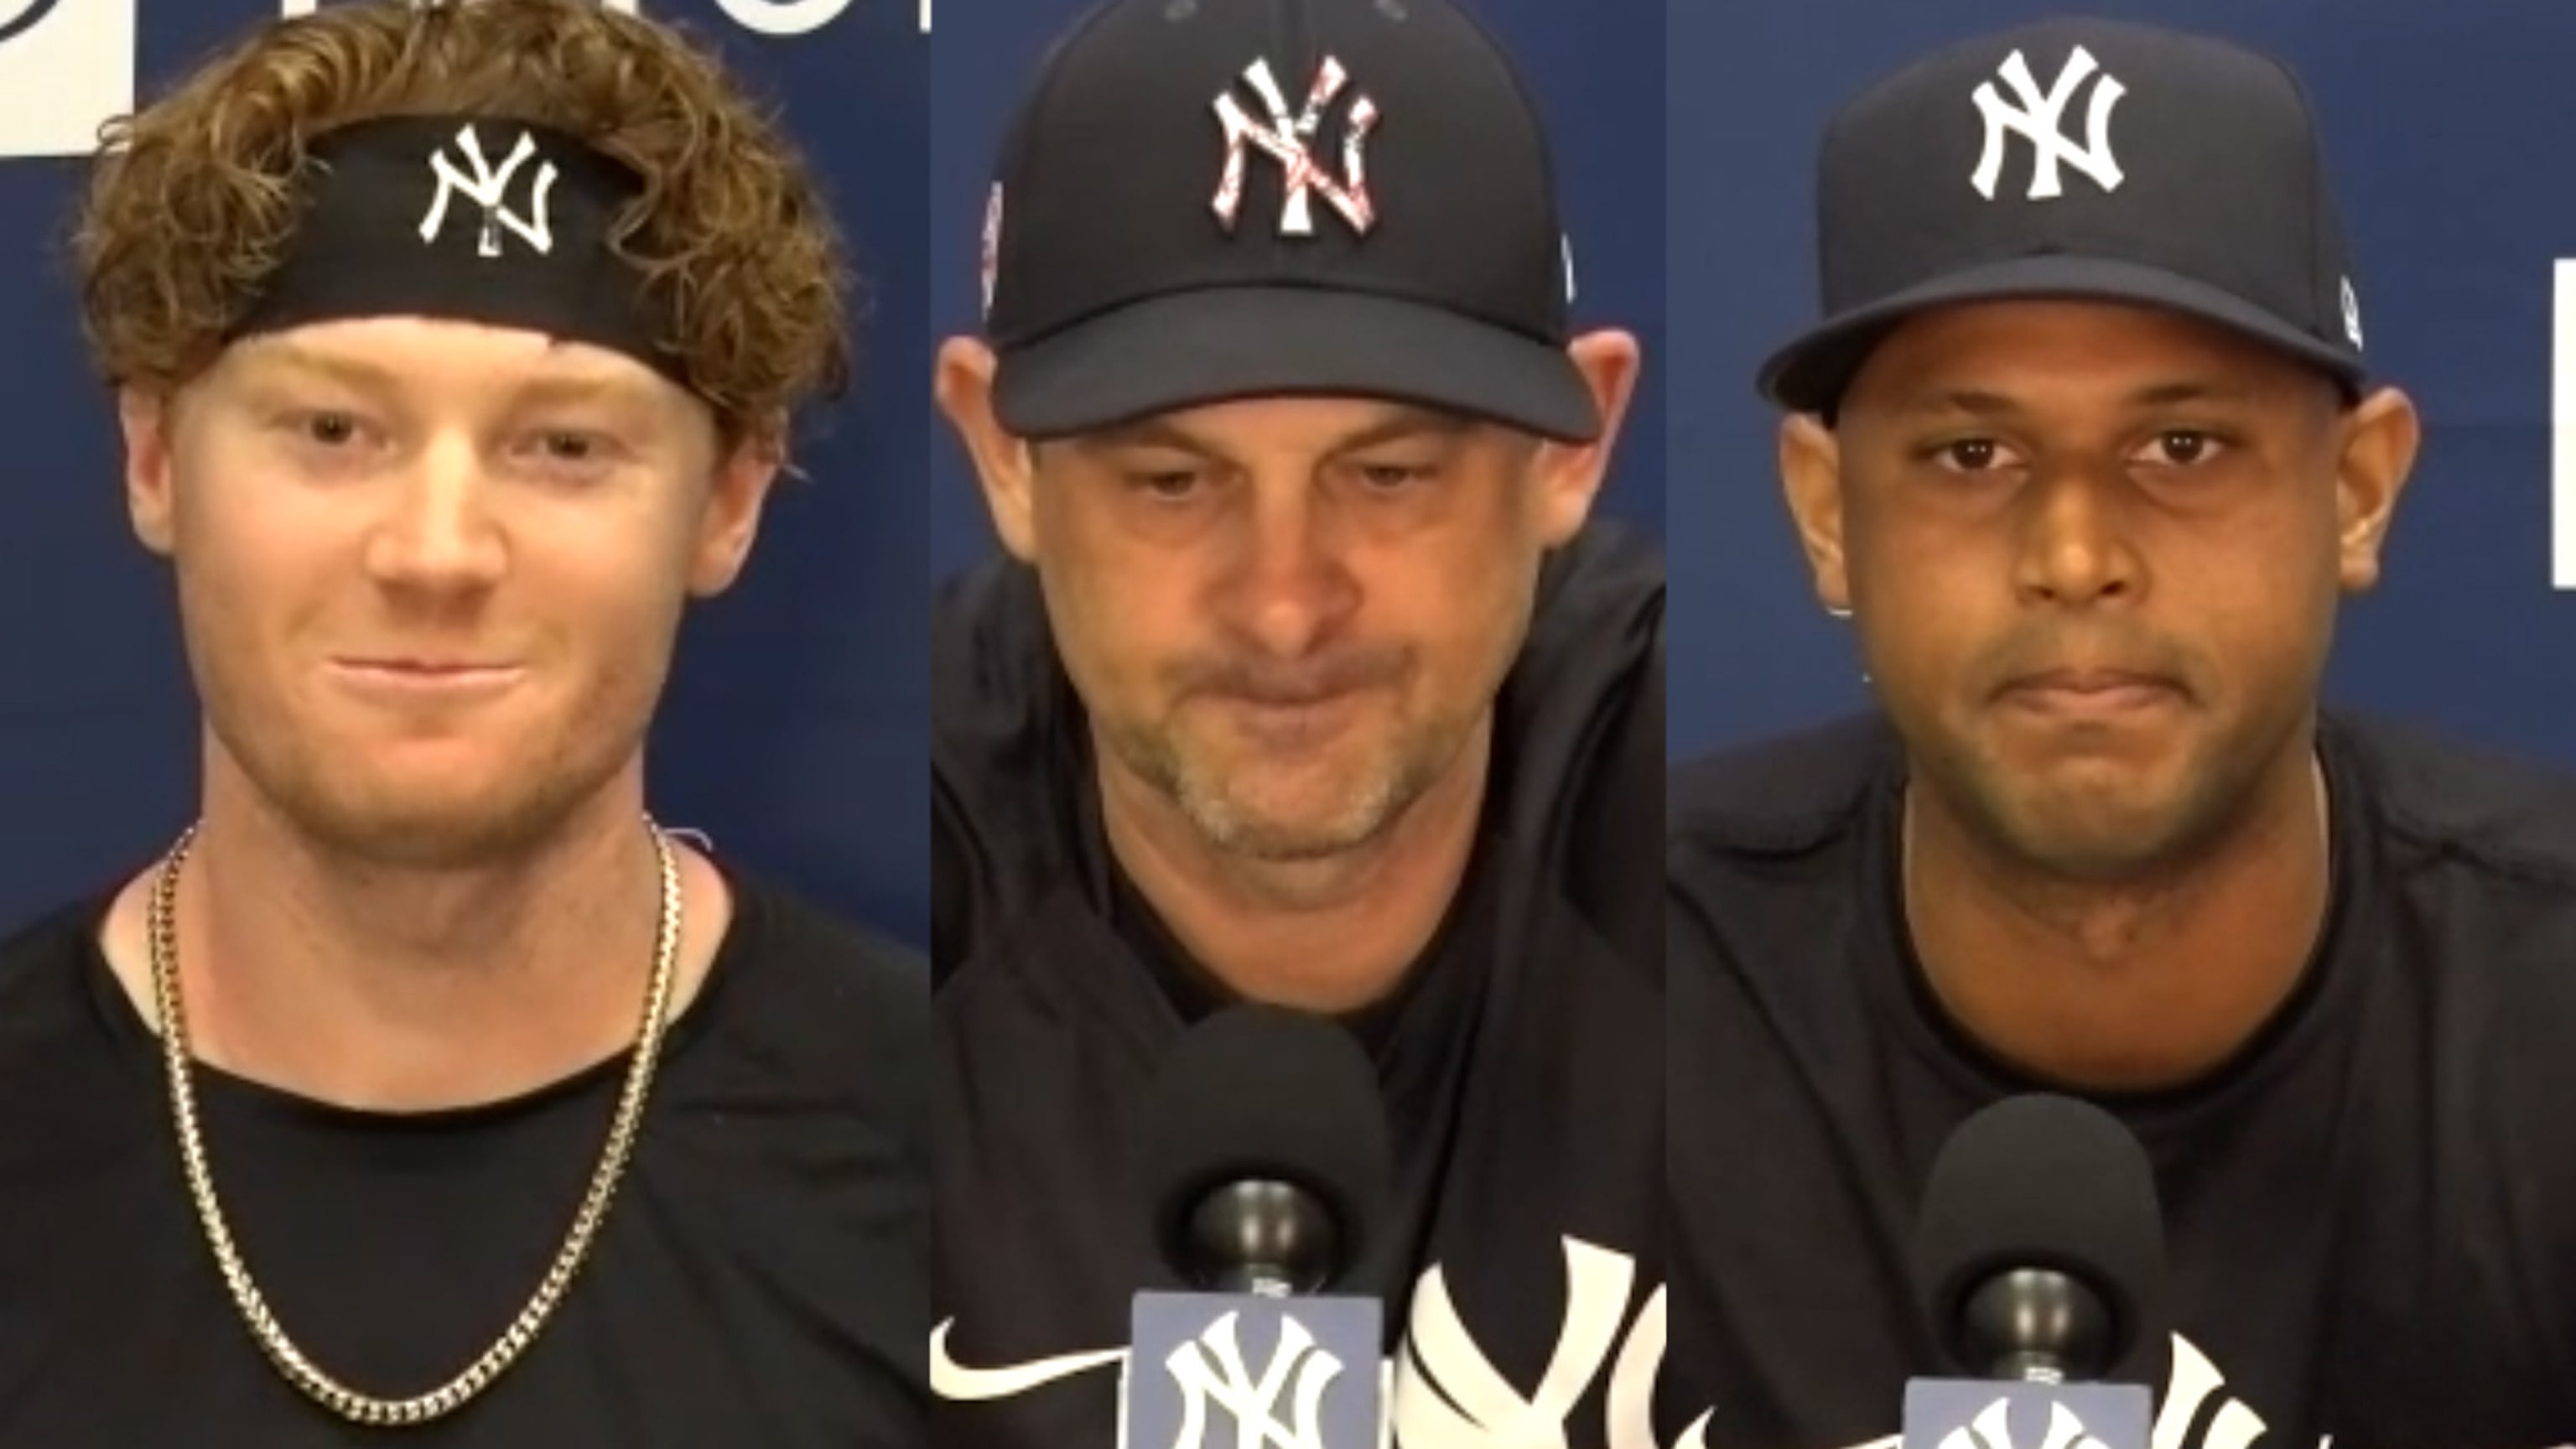 Clint Frazier, Brett Gardner and the disputed NY Yankees turtleneck